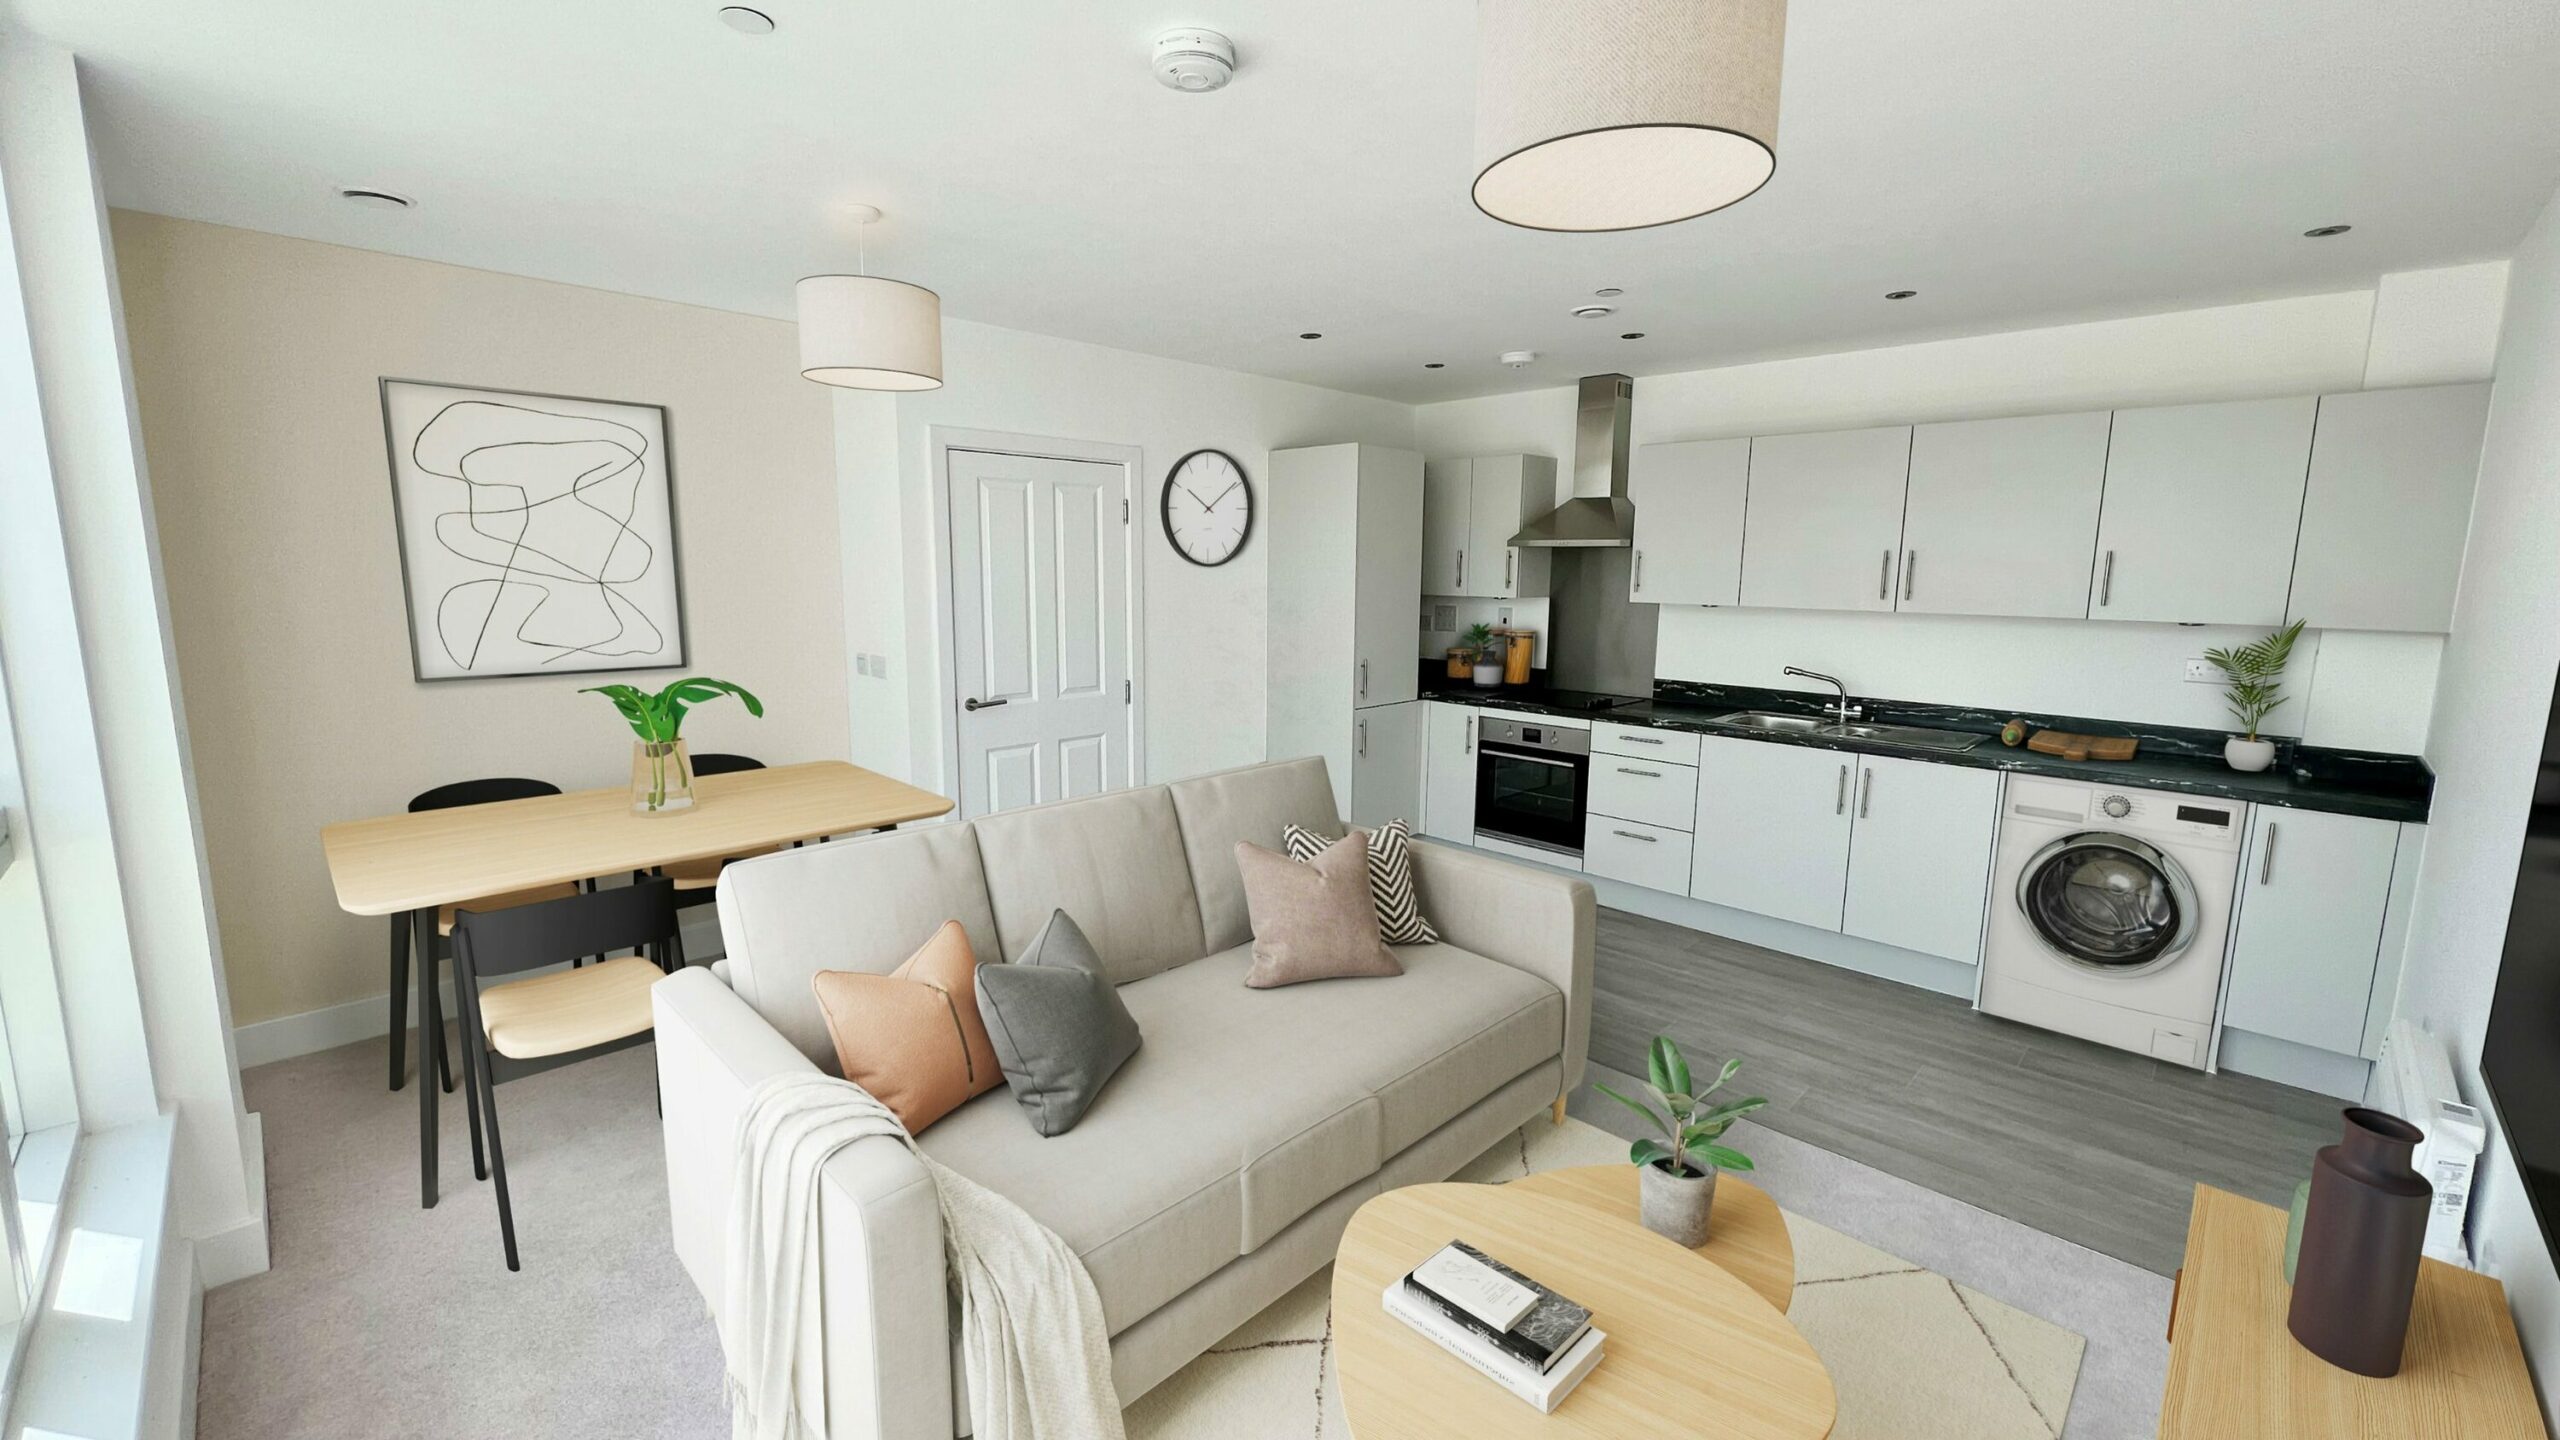 Image of a Kitchen in the Knights Quarter development from Sovereign - available to purchase through Shared Ownership on Share to Buy!